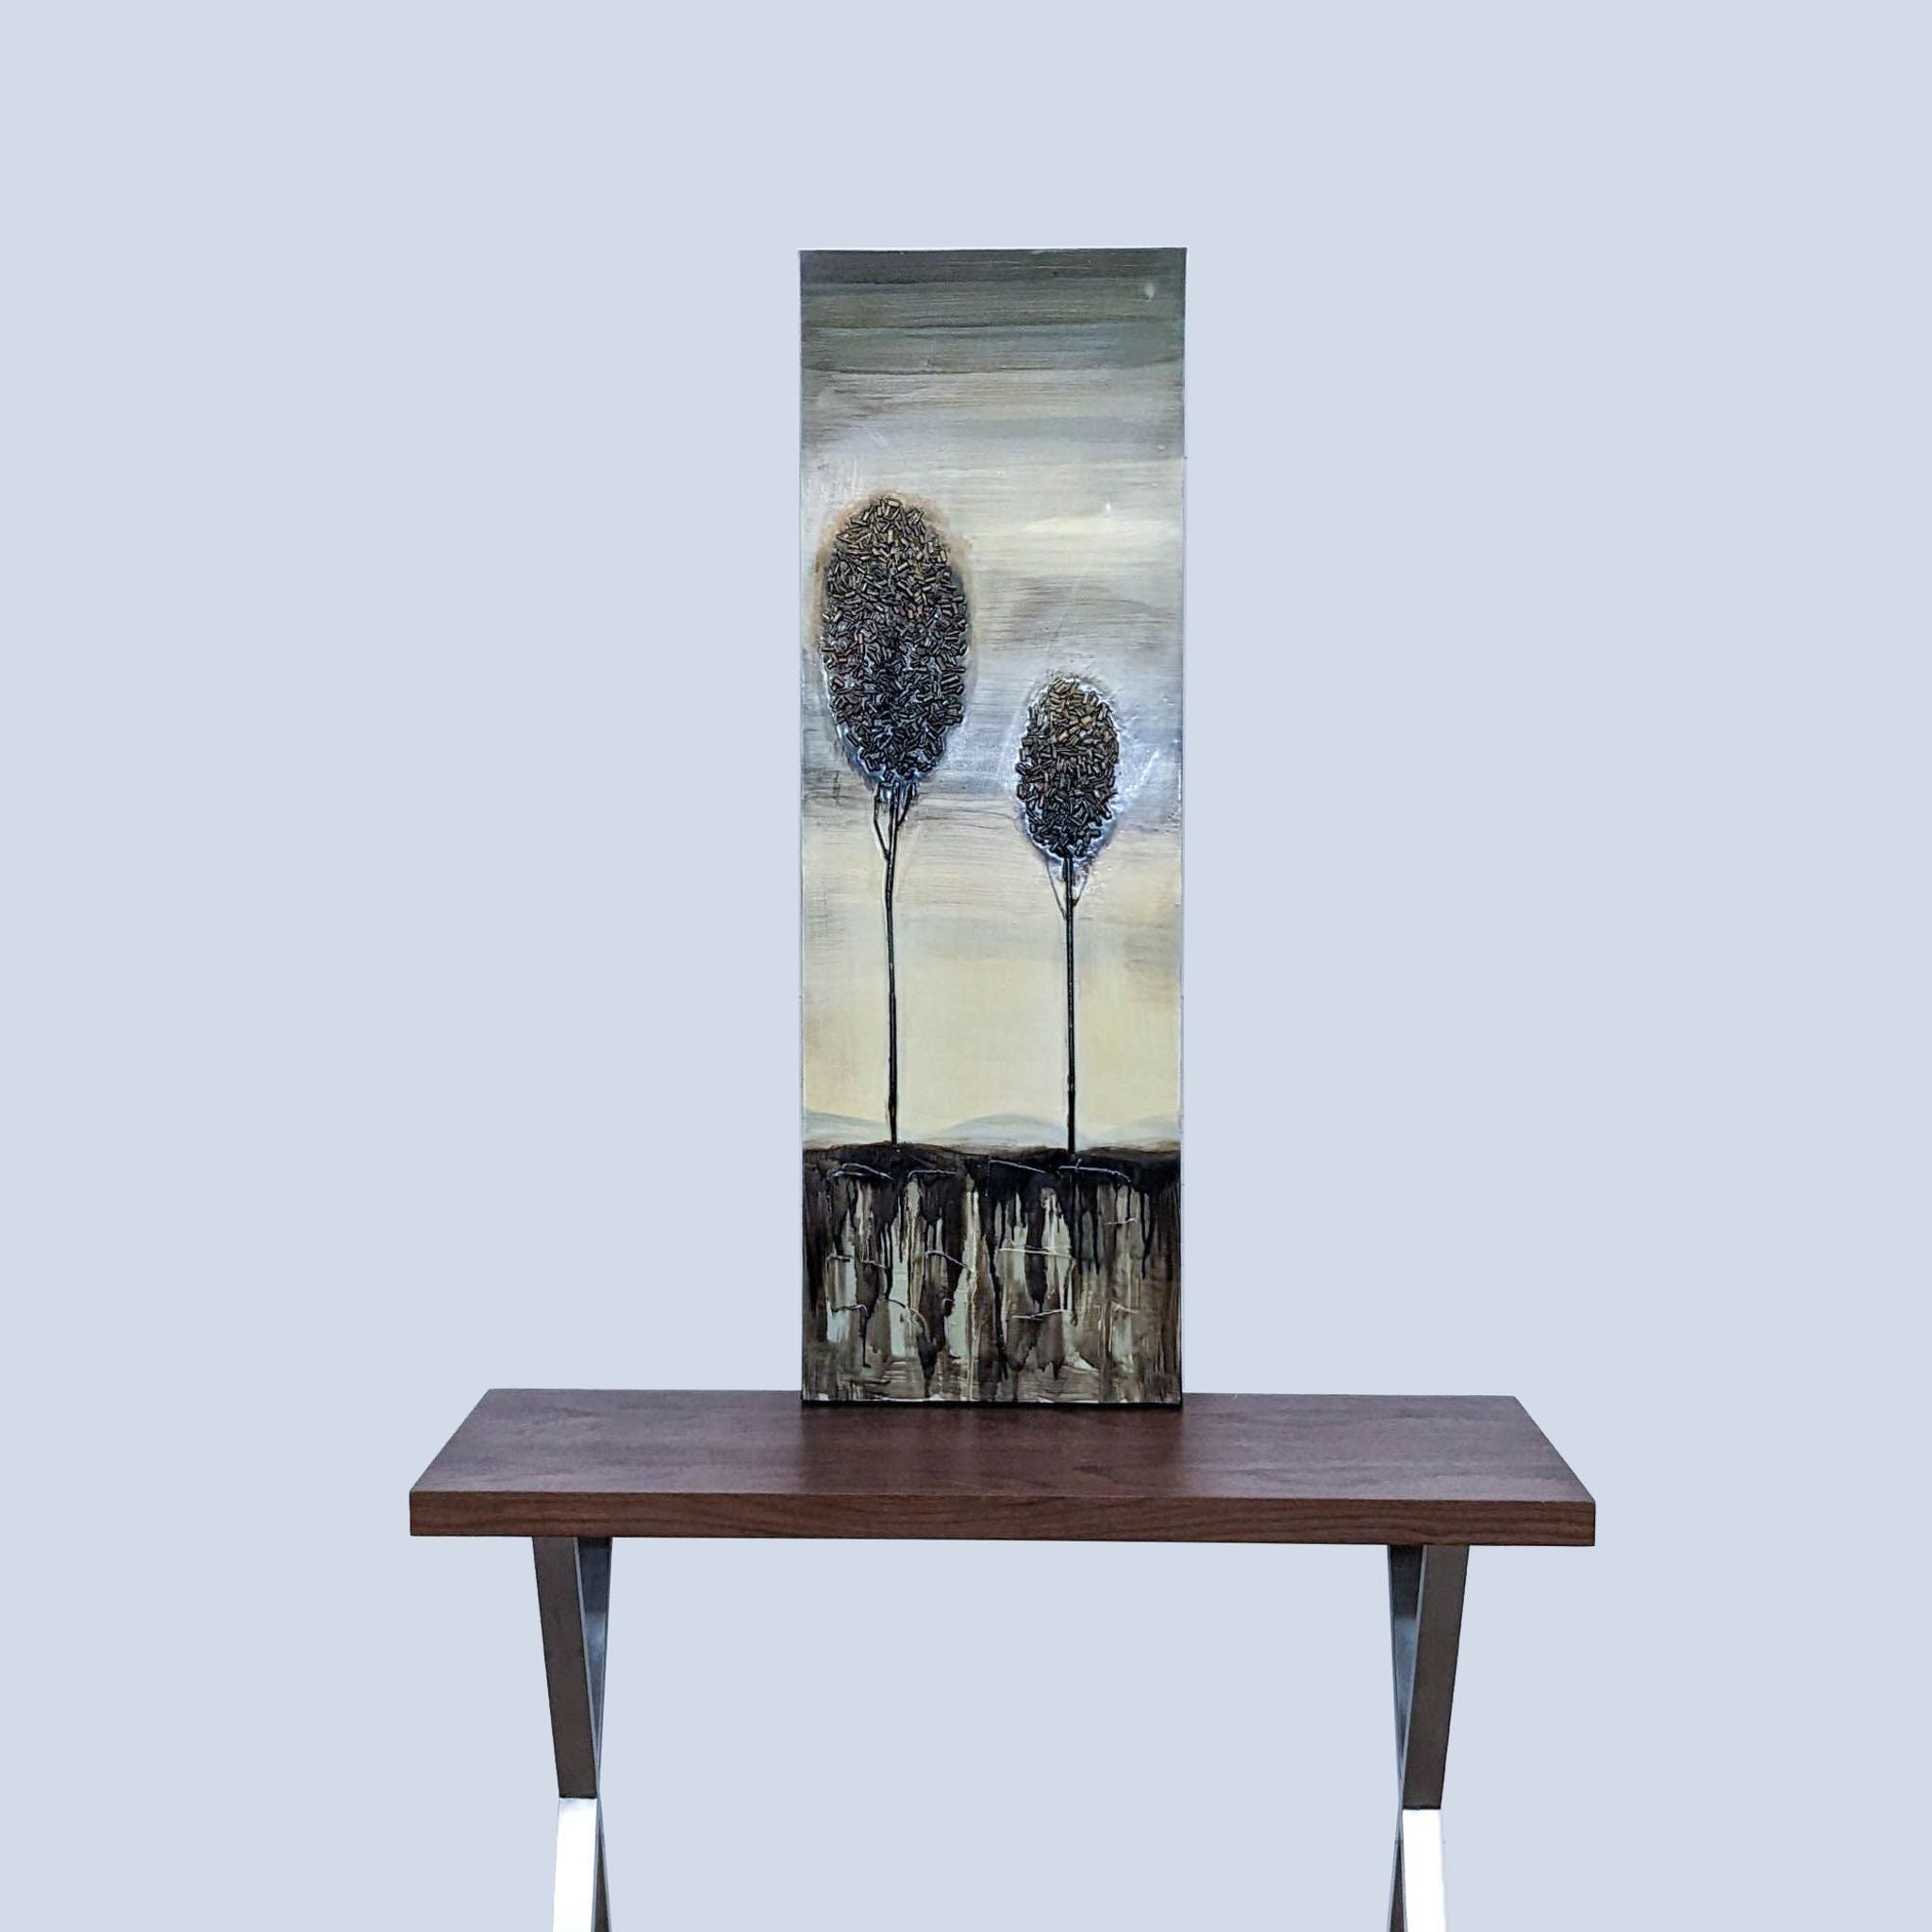 Alt text 1: Reperch mixed media botanical art print depicting two textured trees on canvas, displayed on wooden table against neutral background.